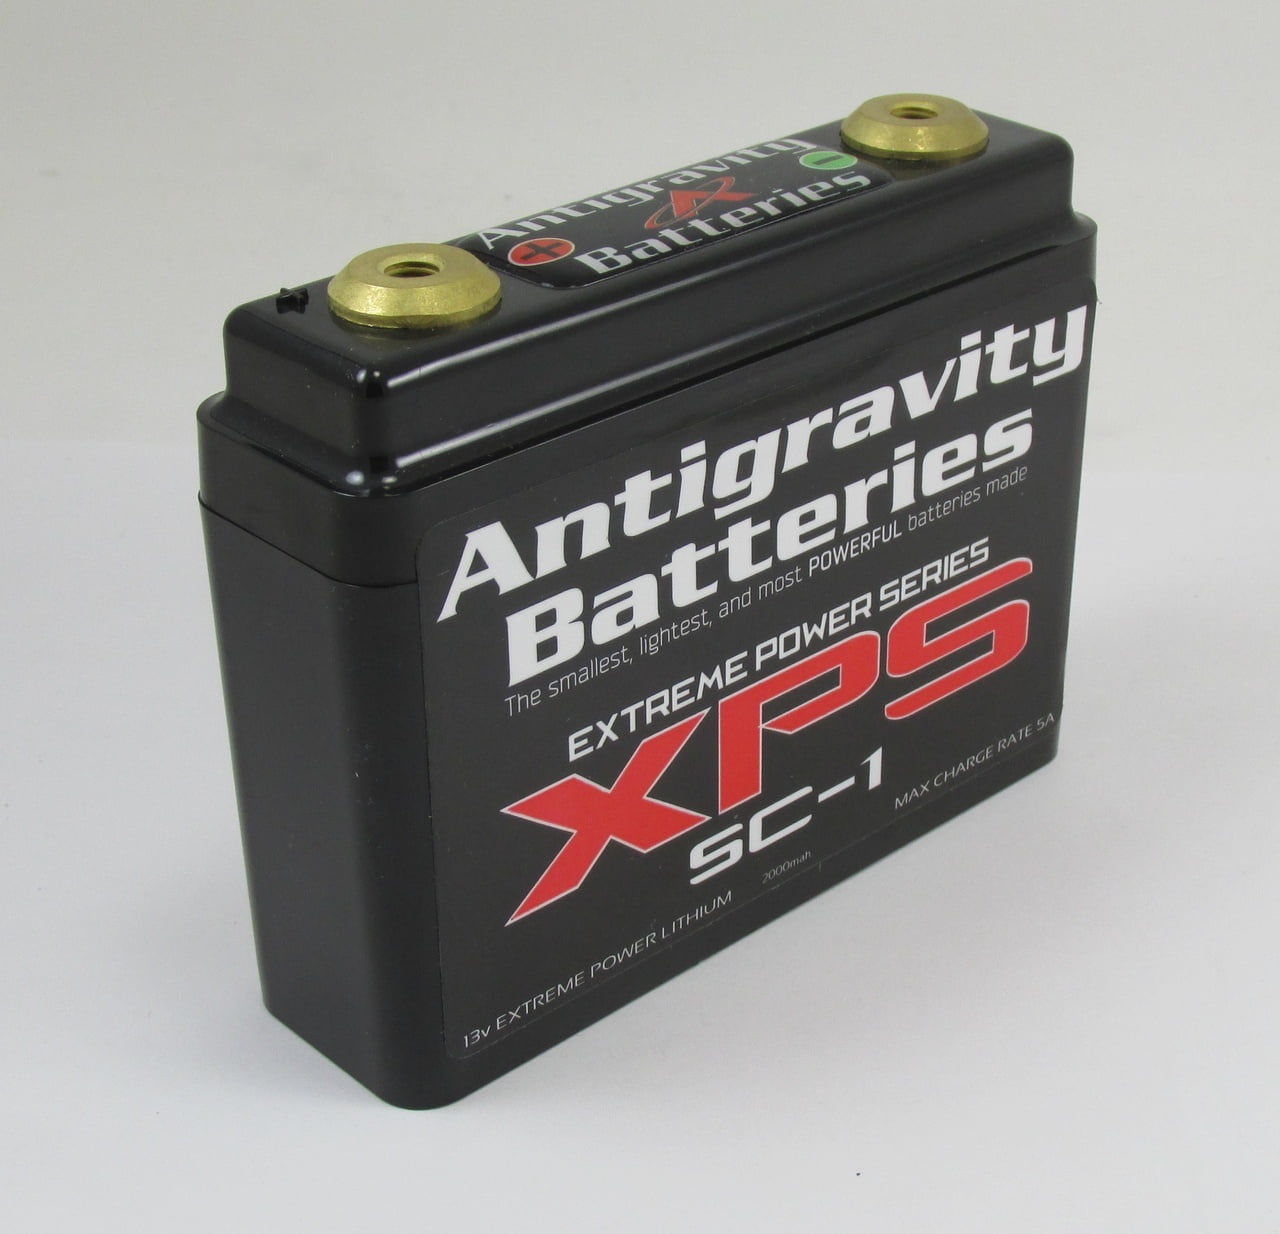 5 Pounds Chopper Bobber Harley Antigravity Batteries 720 CCA OEM 24 Cell YTX12-24 ATX12-24 RIGHT POSITIVE TERMINAL Lightweight Motorcycle Lithium Ion Battery